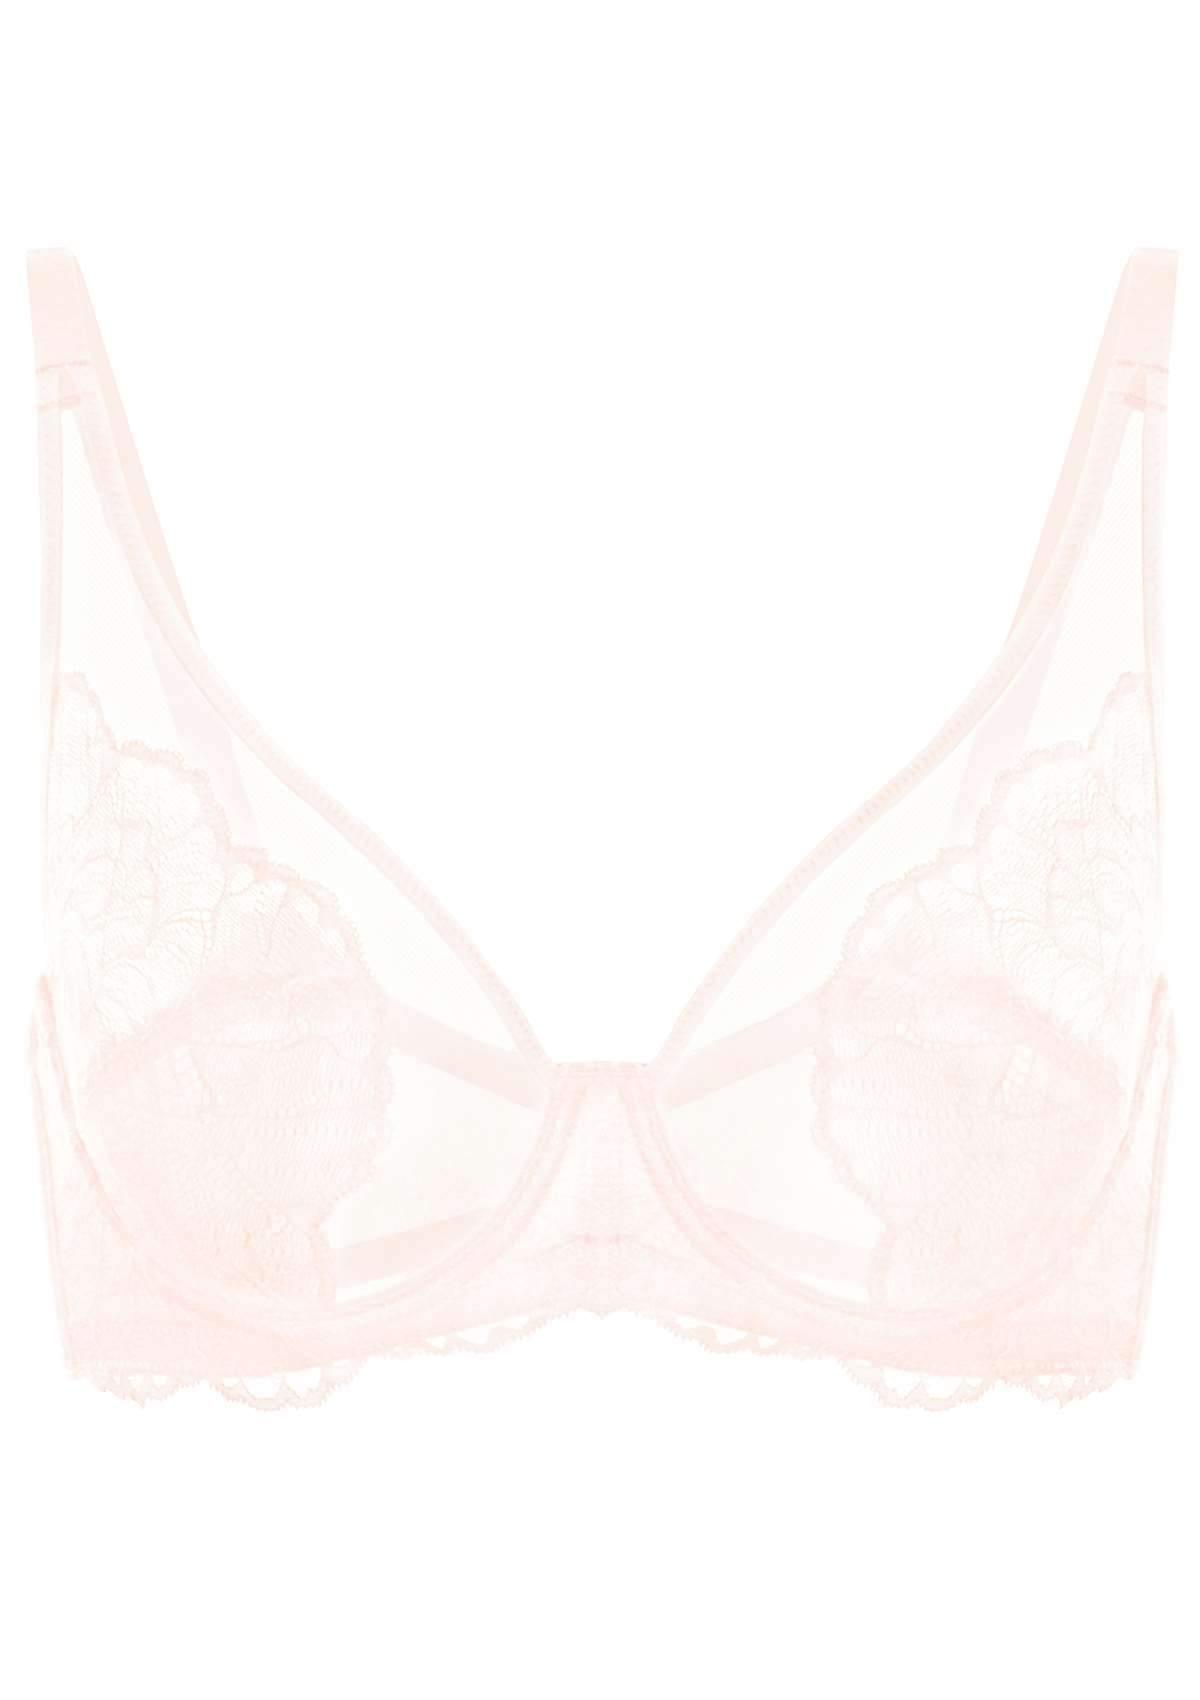 HSIA Blossom Sheer Lace Bra: Comfortable Underwire Bra For Big Busts - White / 34 / D